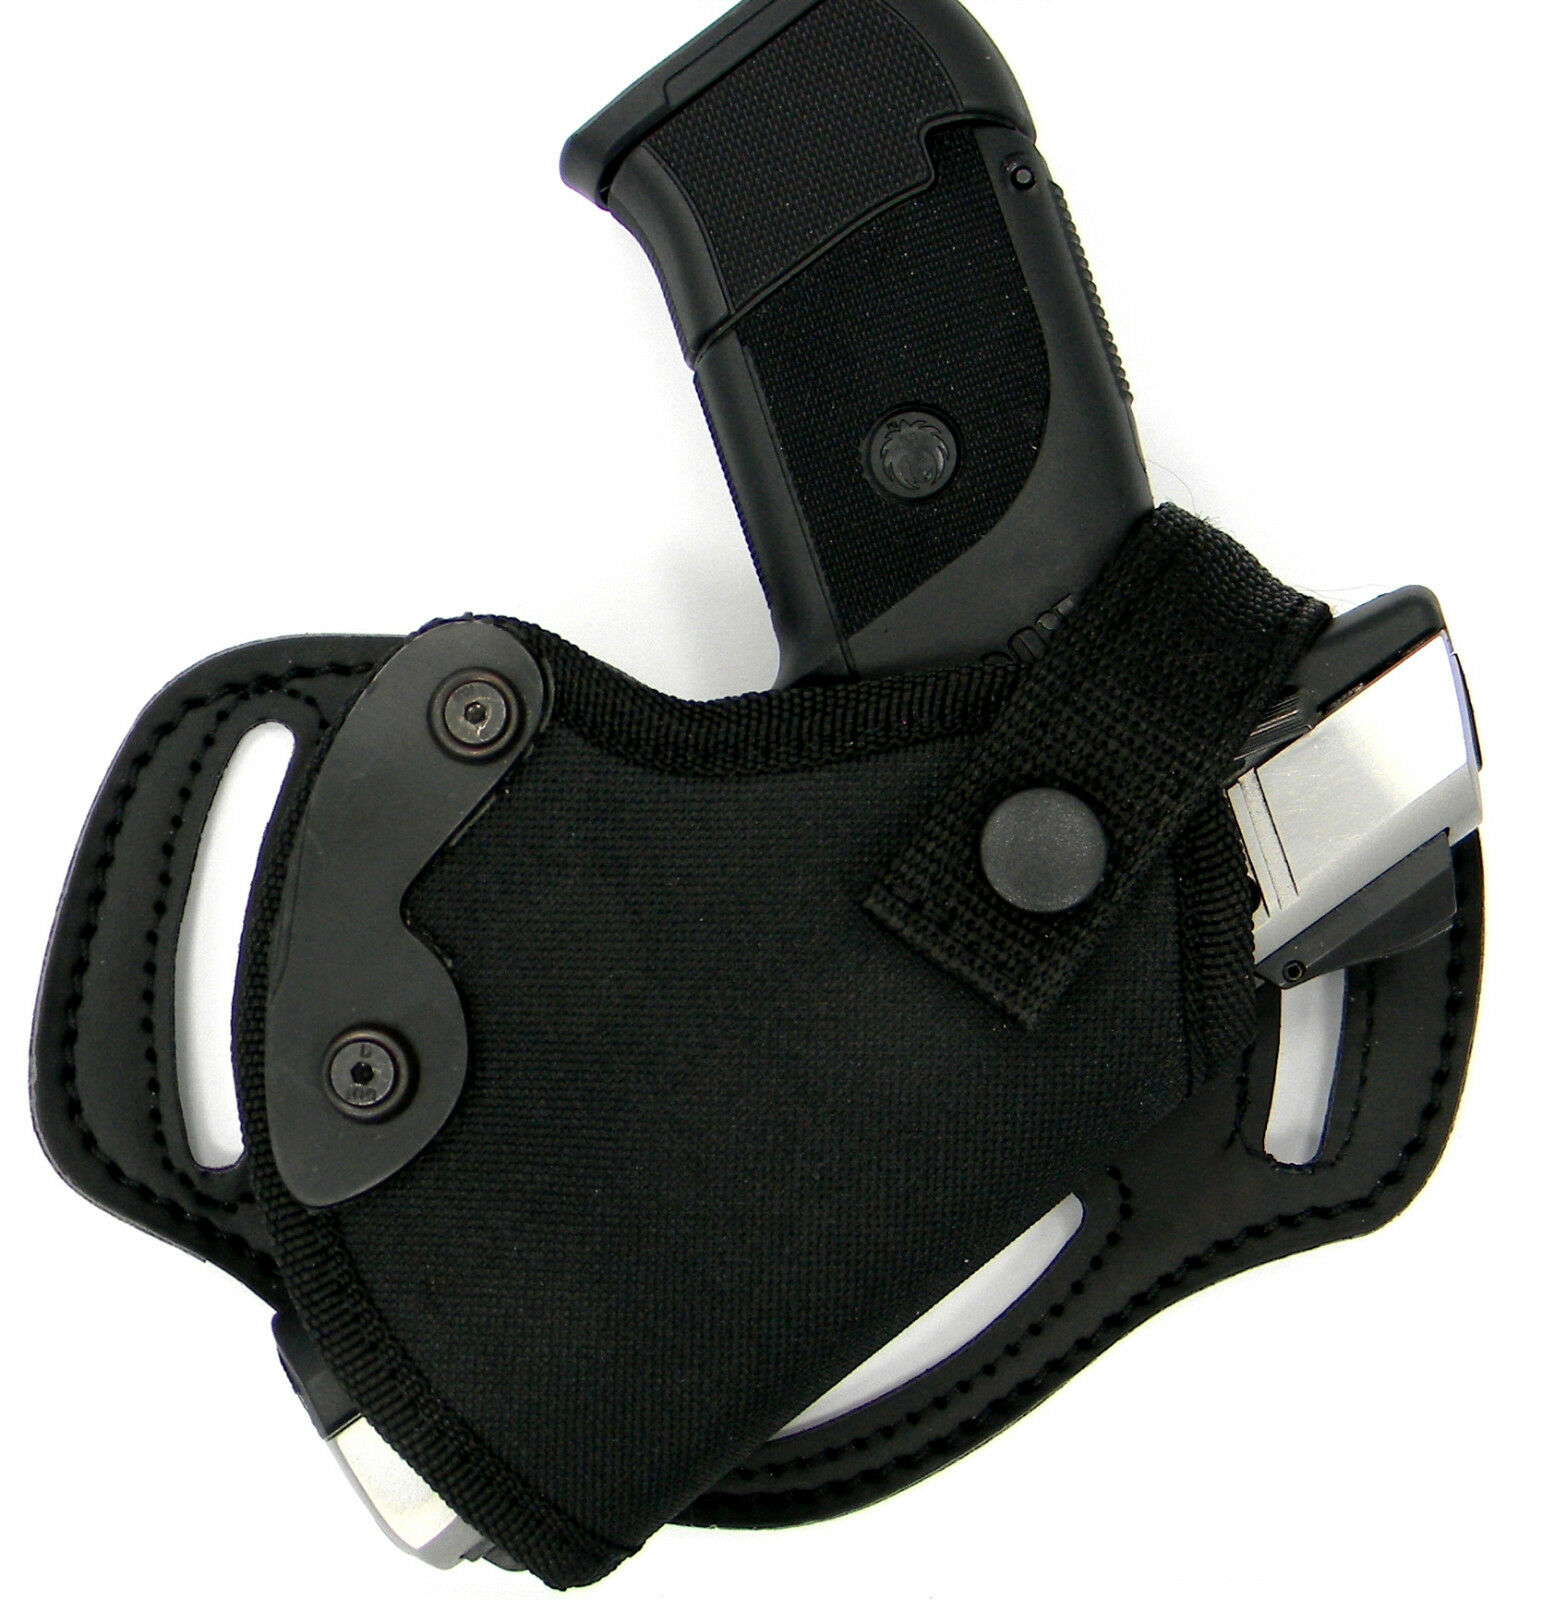 CEBECI Right Hand Small of Back (SOB) or Strong Side Belt Holster - Choose Gun